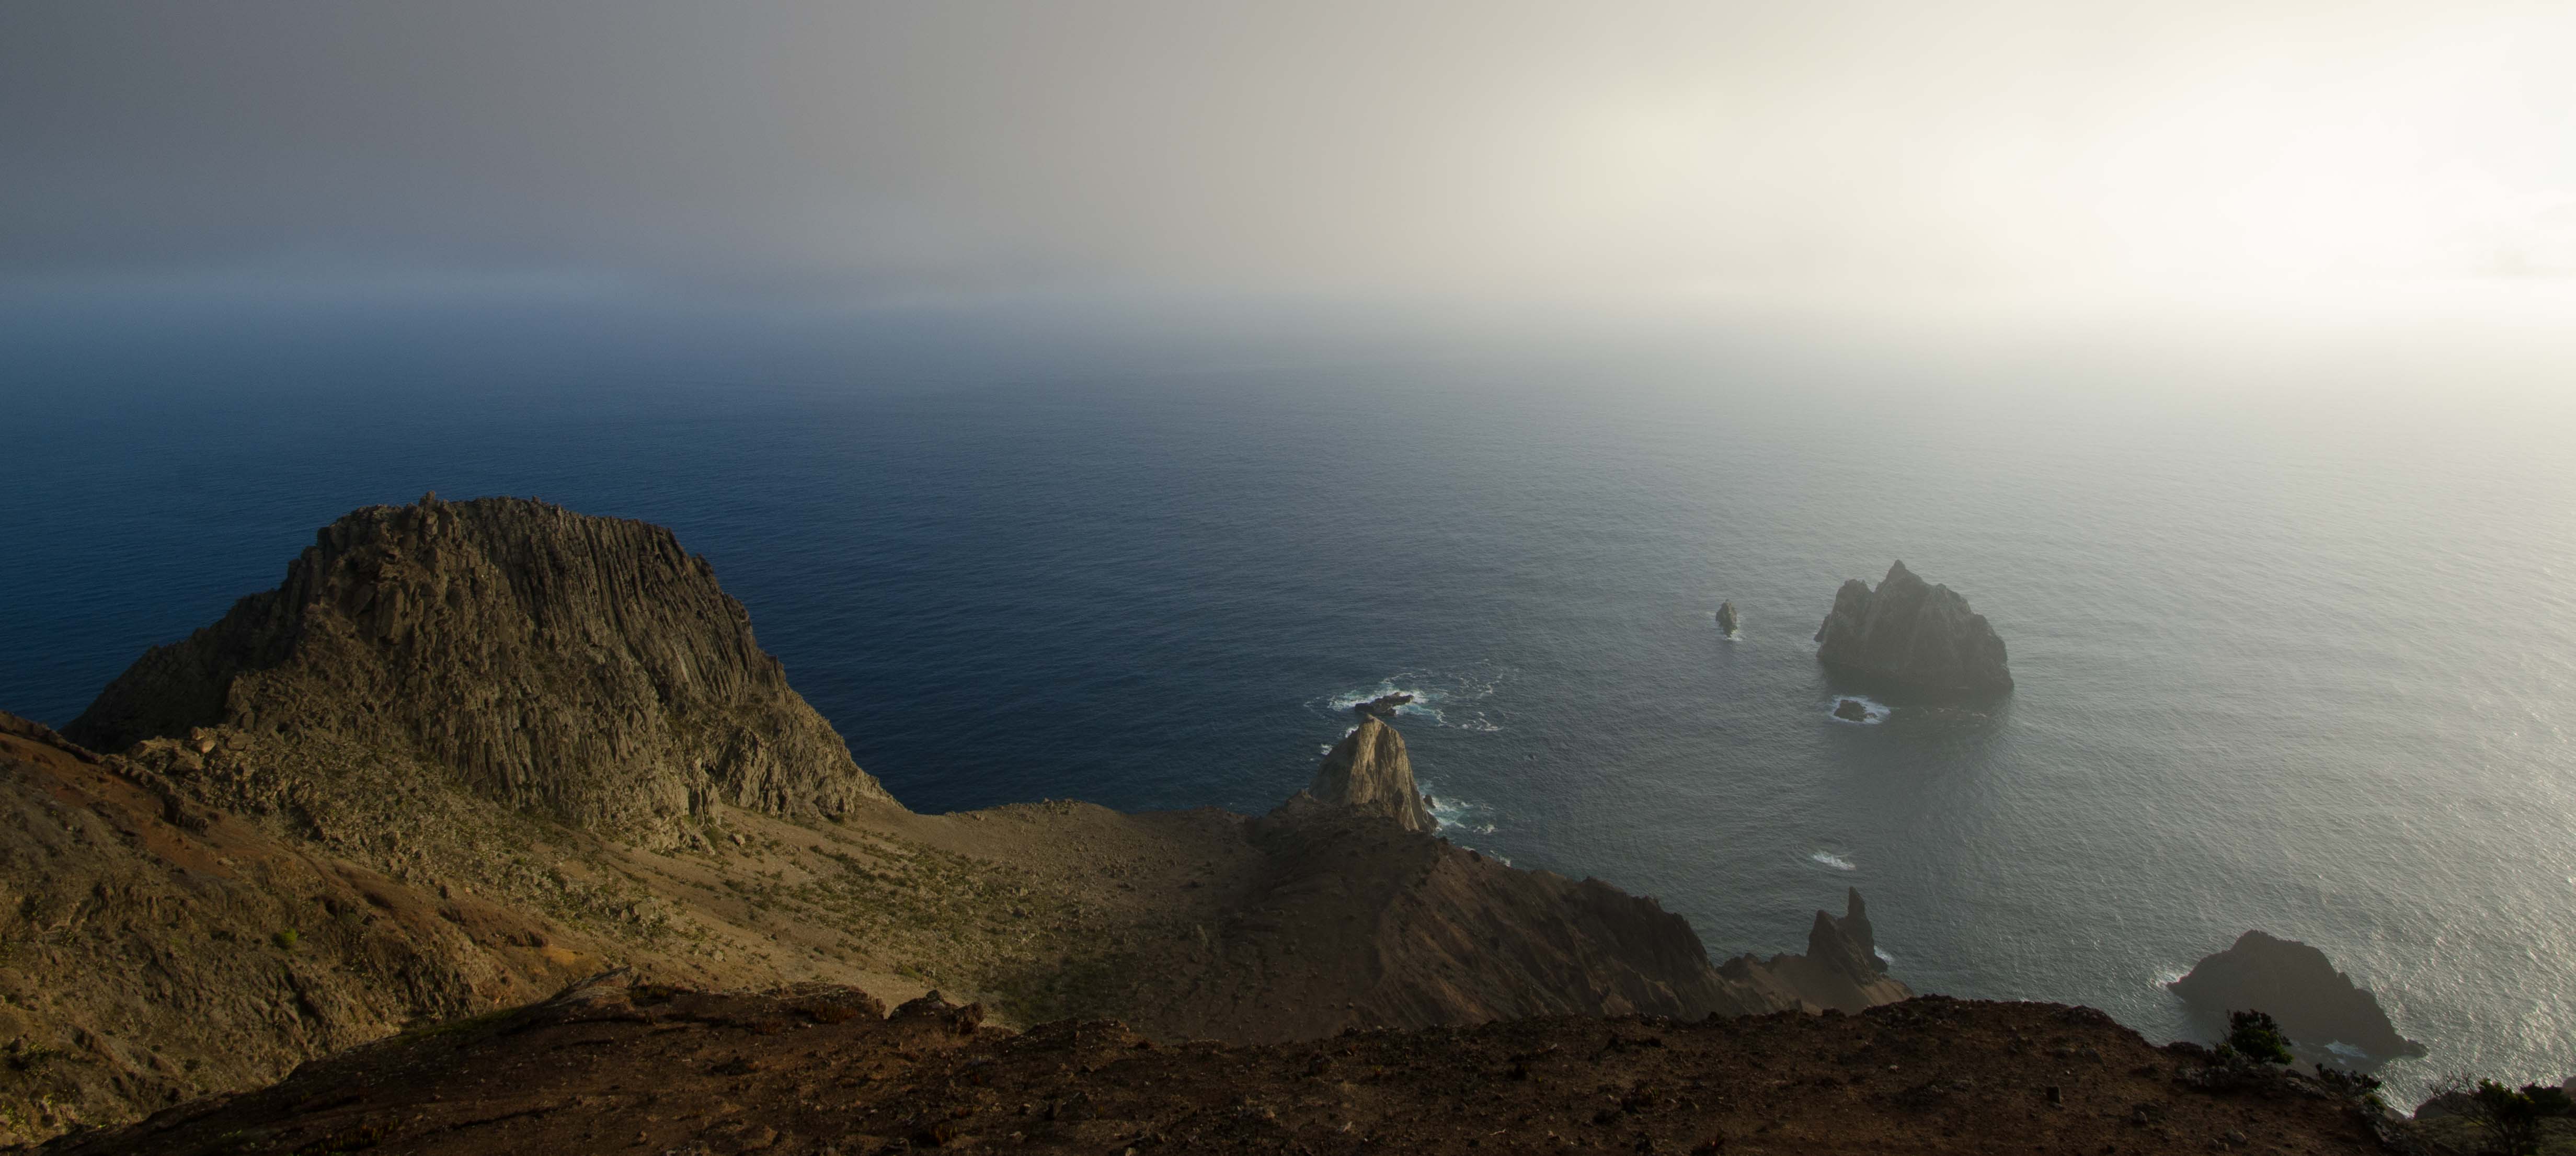 St Helena and its Marine Protected Area